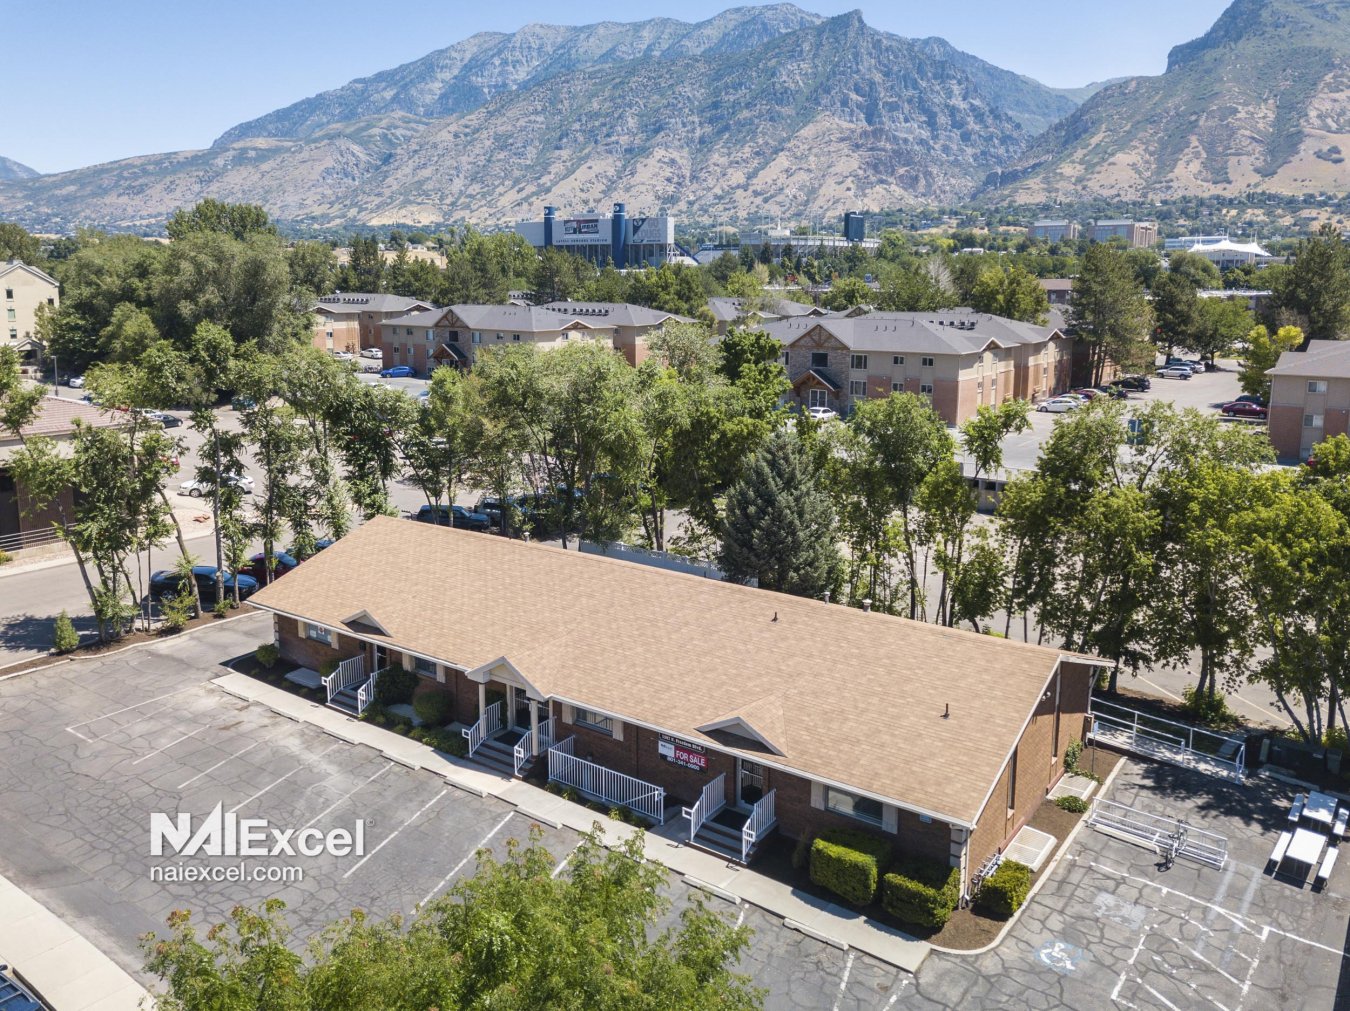 Provo office building - aerial